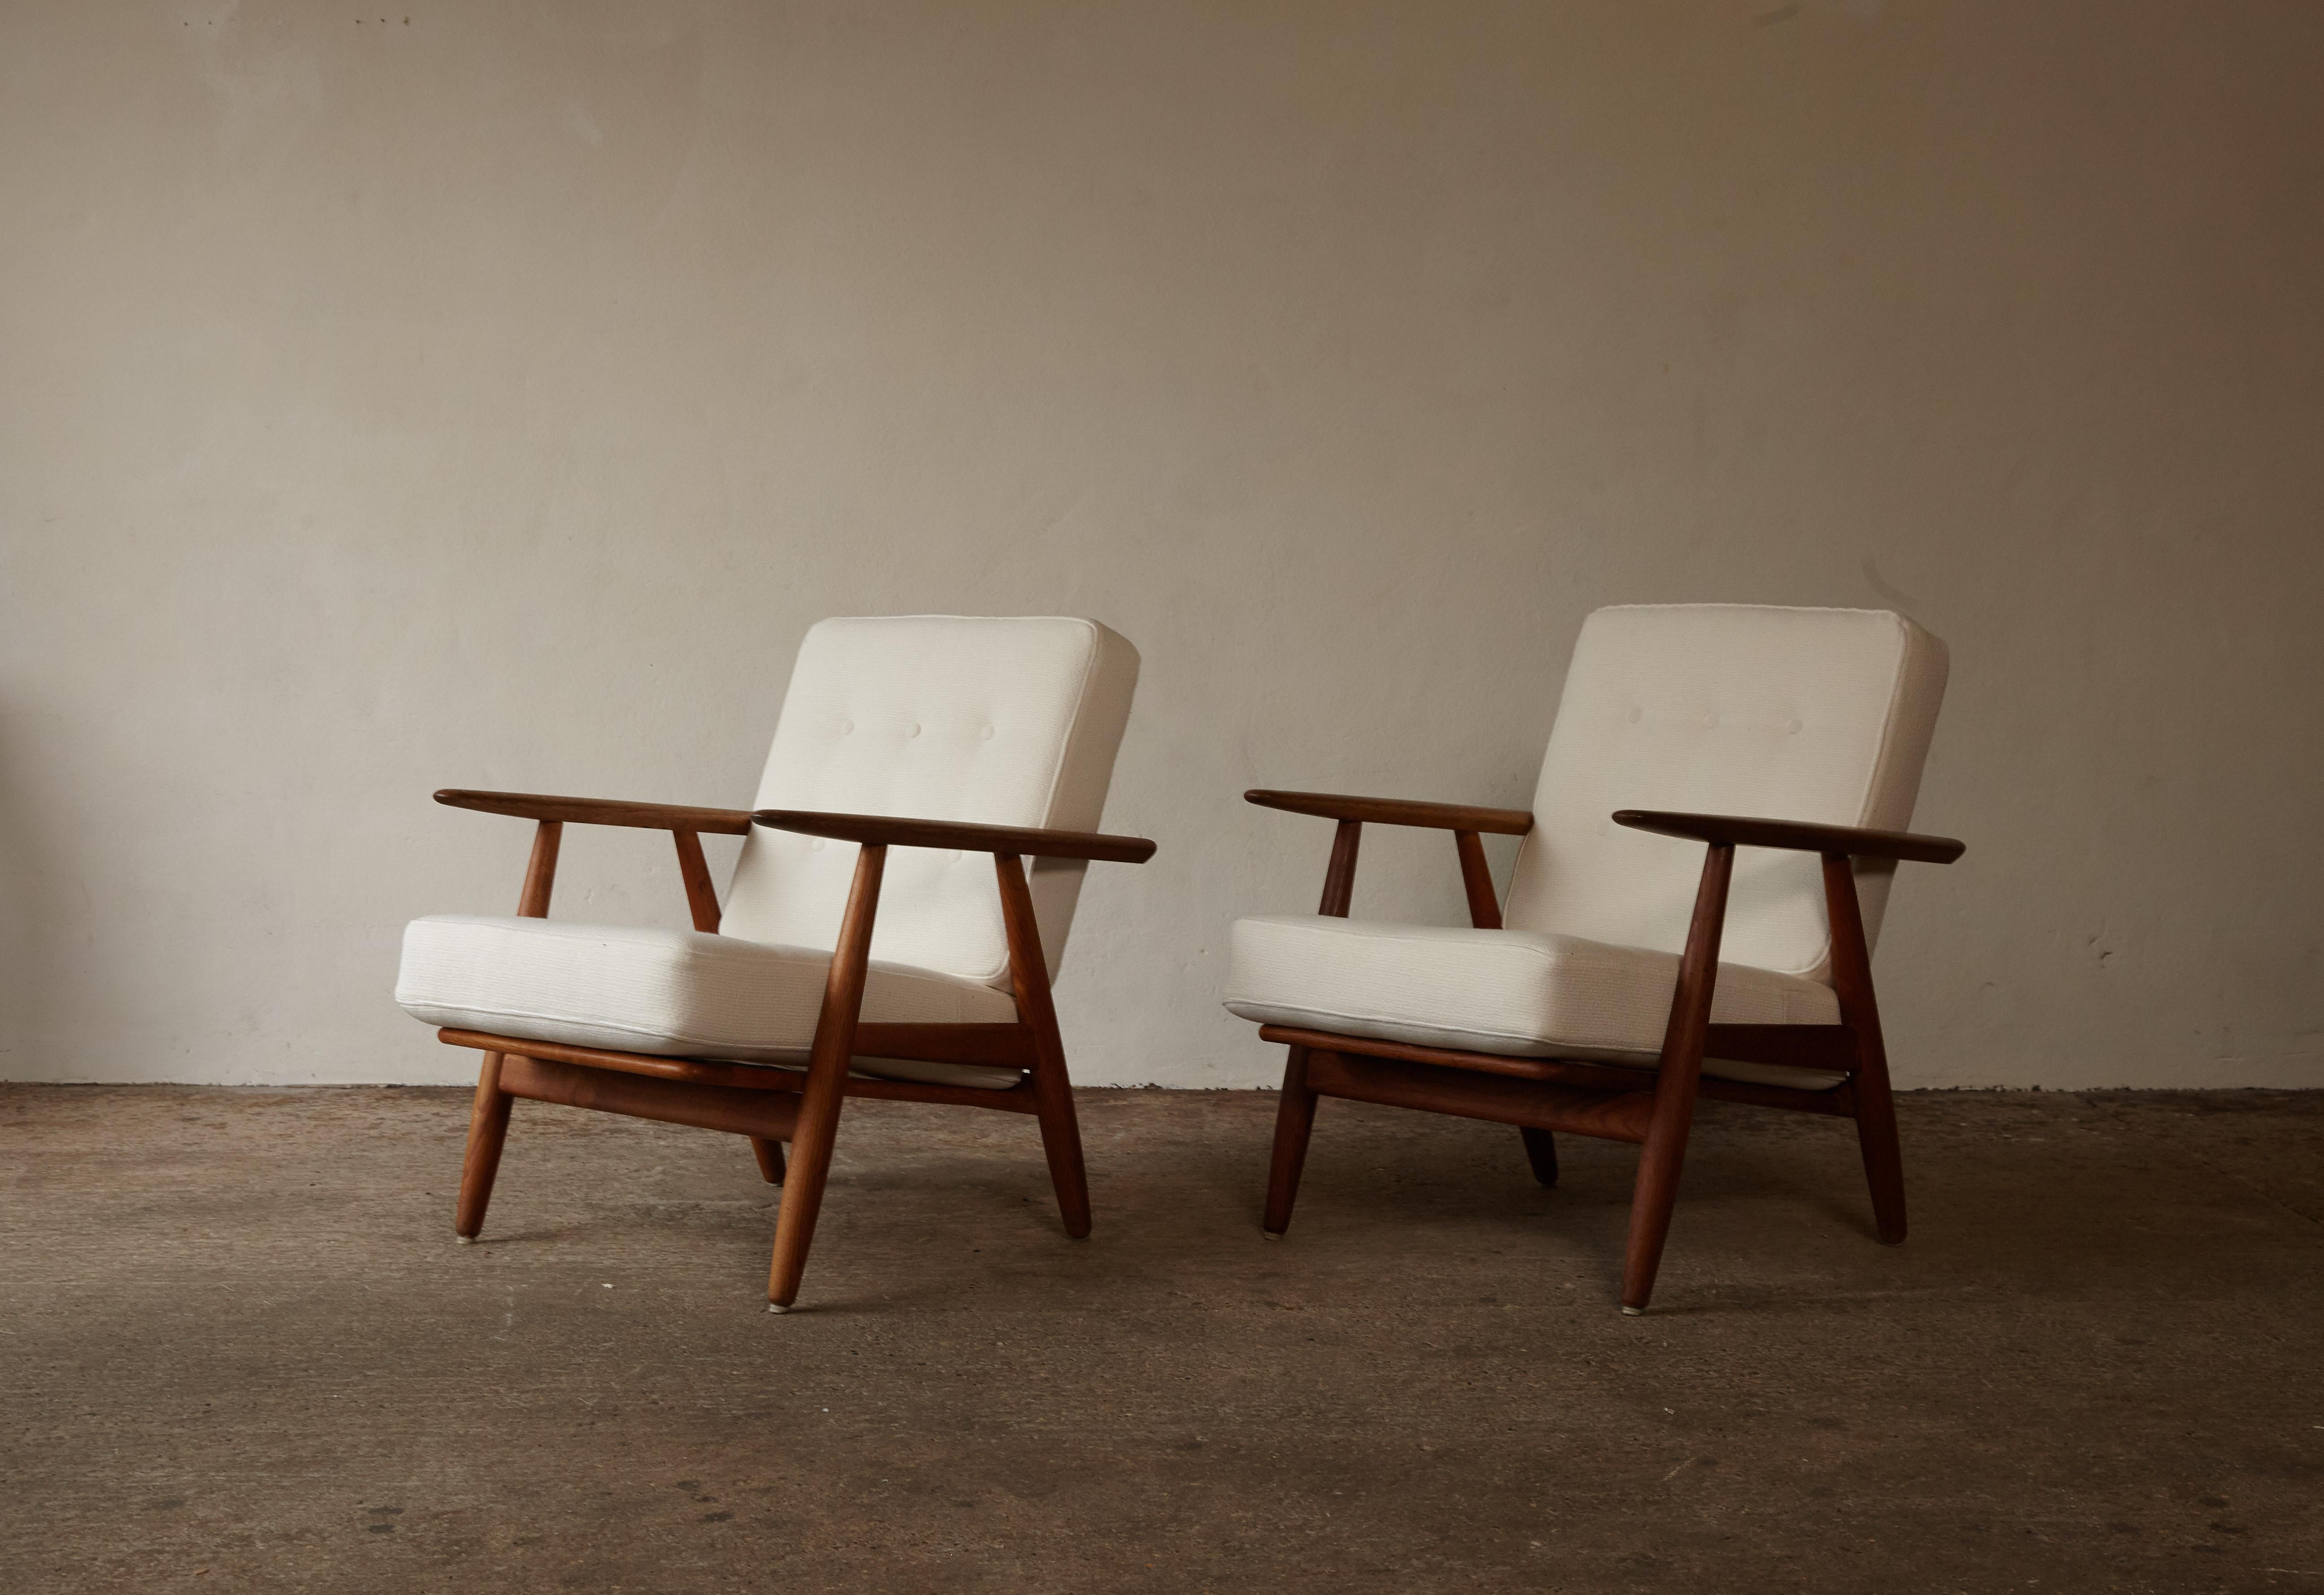 A pair of oak GE-240 cigar lounge chairs designed by Hans J. Wegner and produced by GETAMA, Denmark. The oak frames are in very good vintage condition with only very minor signs of age and use. Original sprung cushions re-upholstered in a high